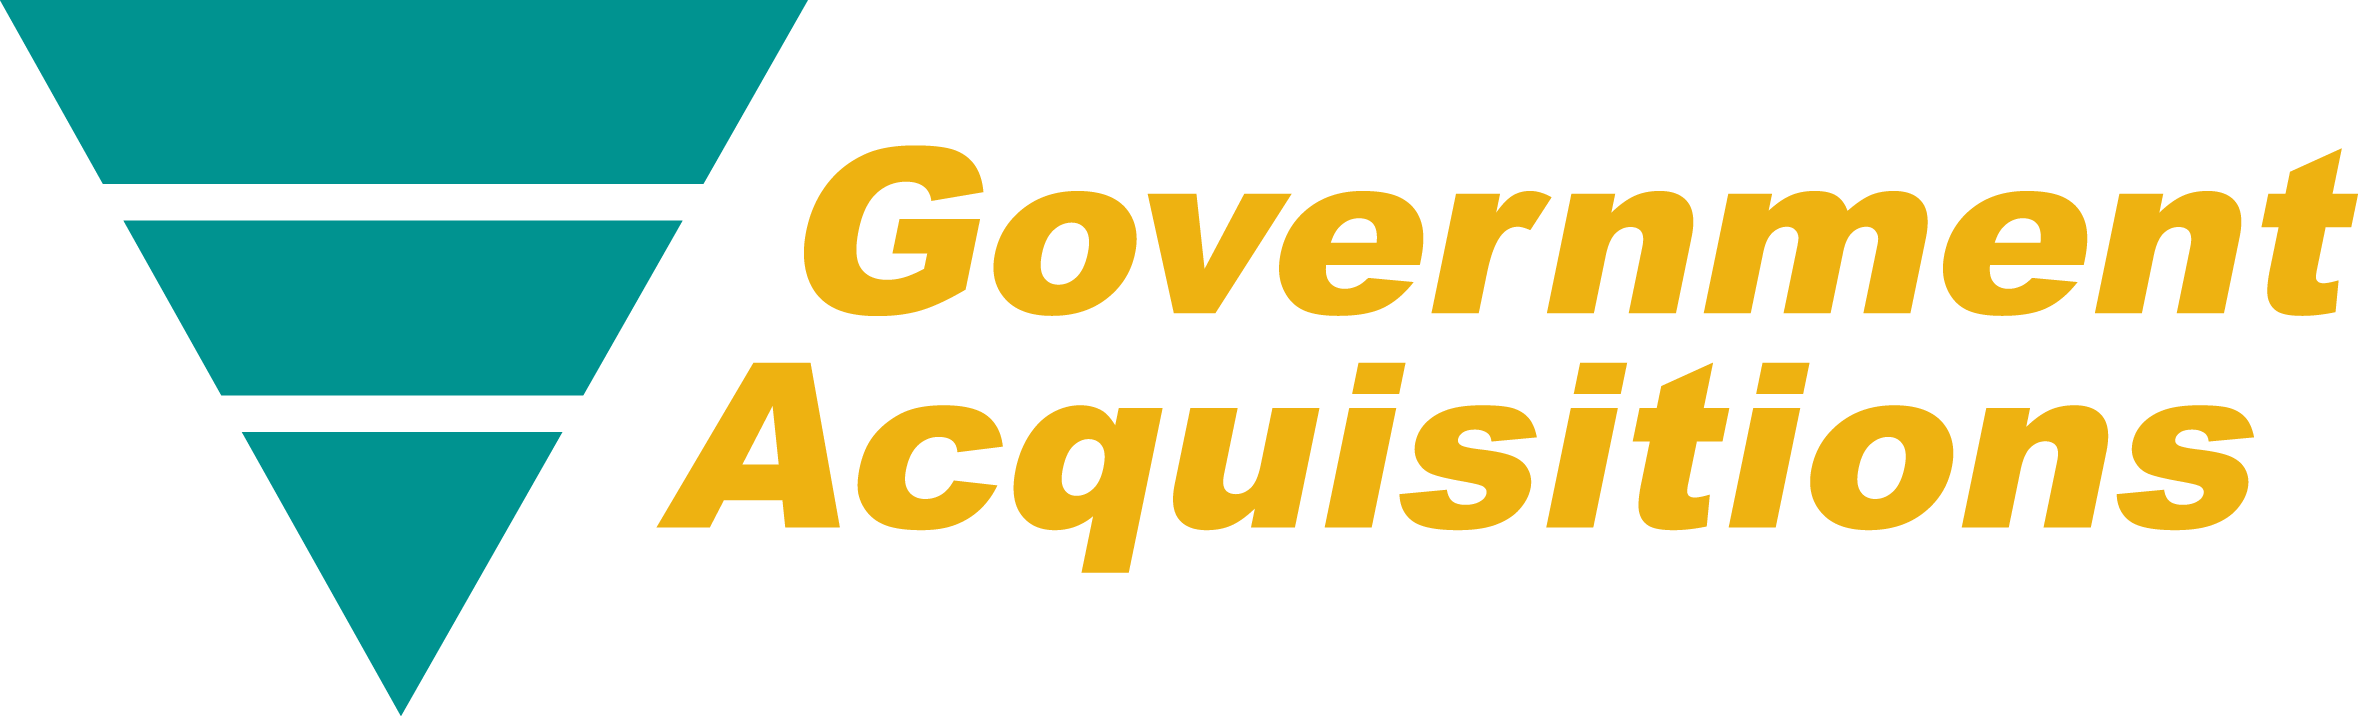 government-acquisitions-logo